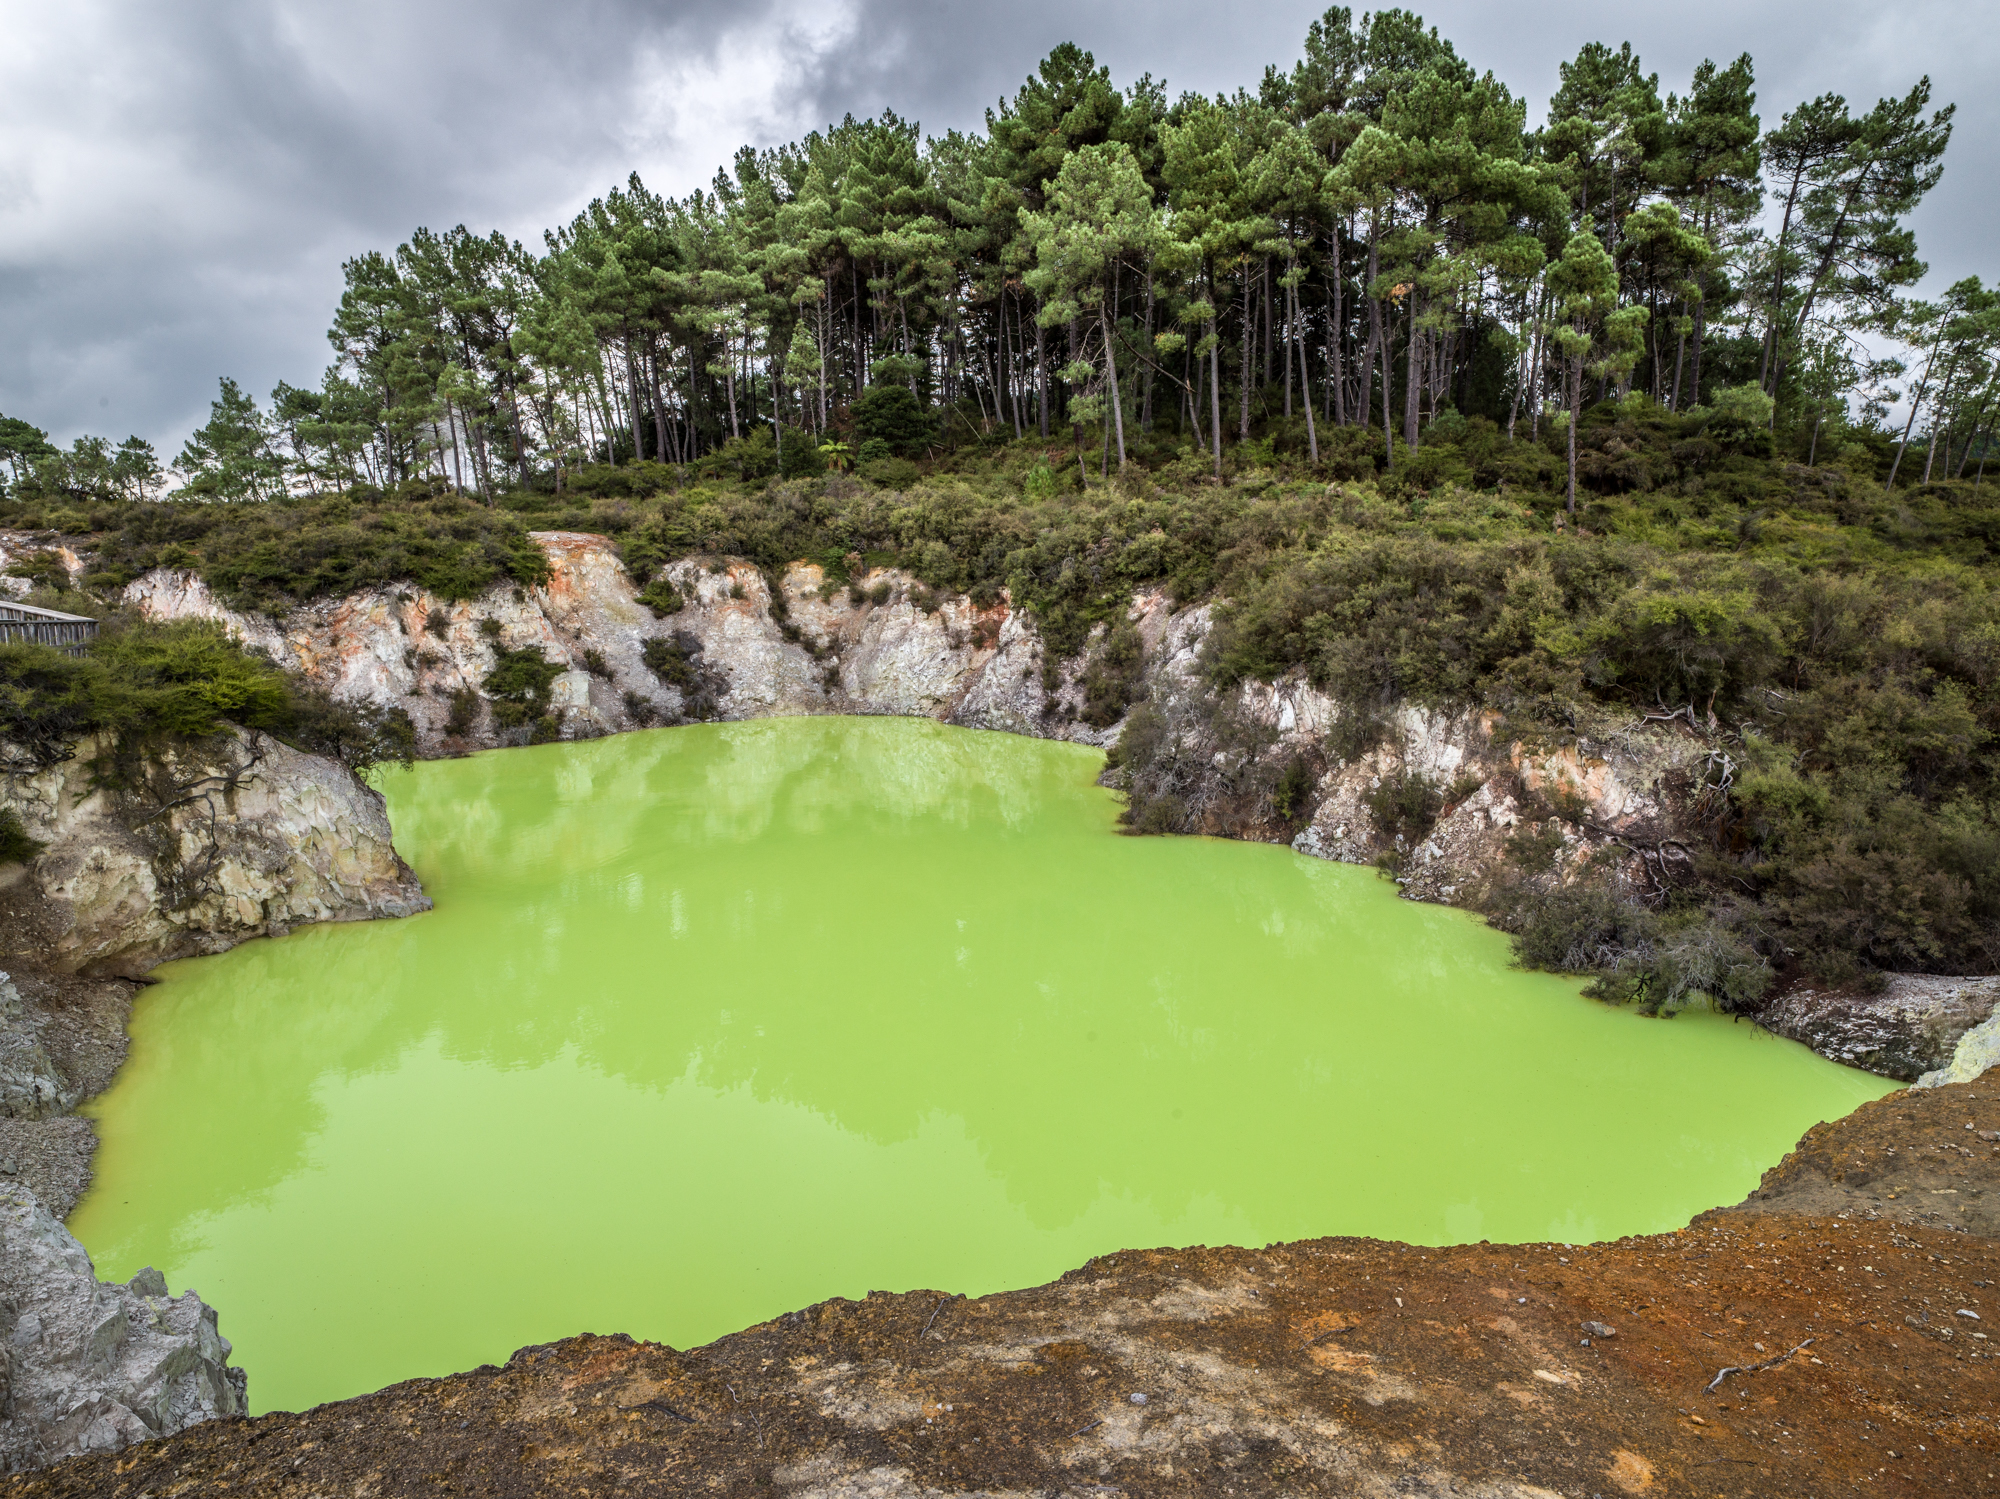   Waiotaupu’s “Devil Bath,” New Zealand  - The green color of this geothermal pool is caused by sulphur deposits along with other minerals fed by the nearby Champagne Pool. Waiotapu is protected as a reserve, but has a long history of tourism and sin